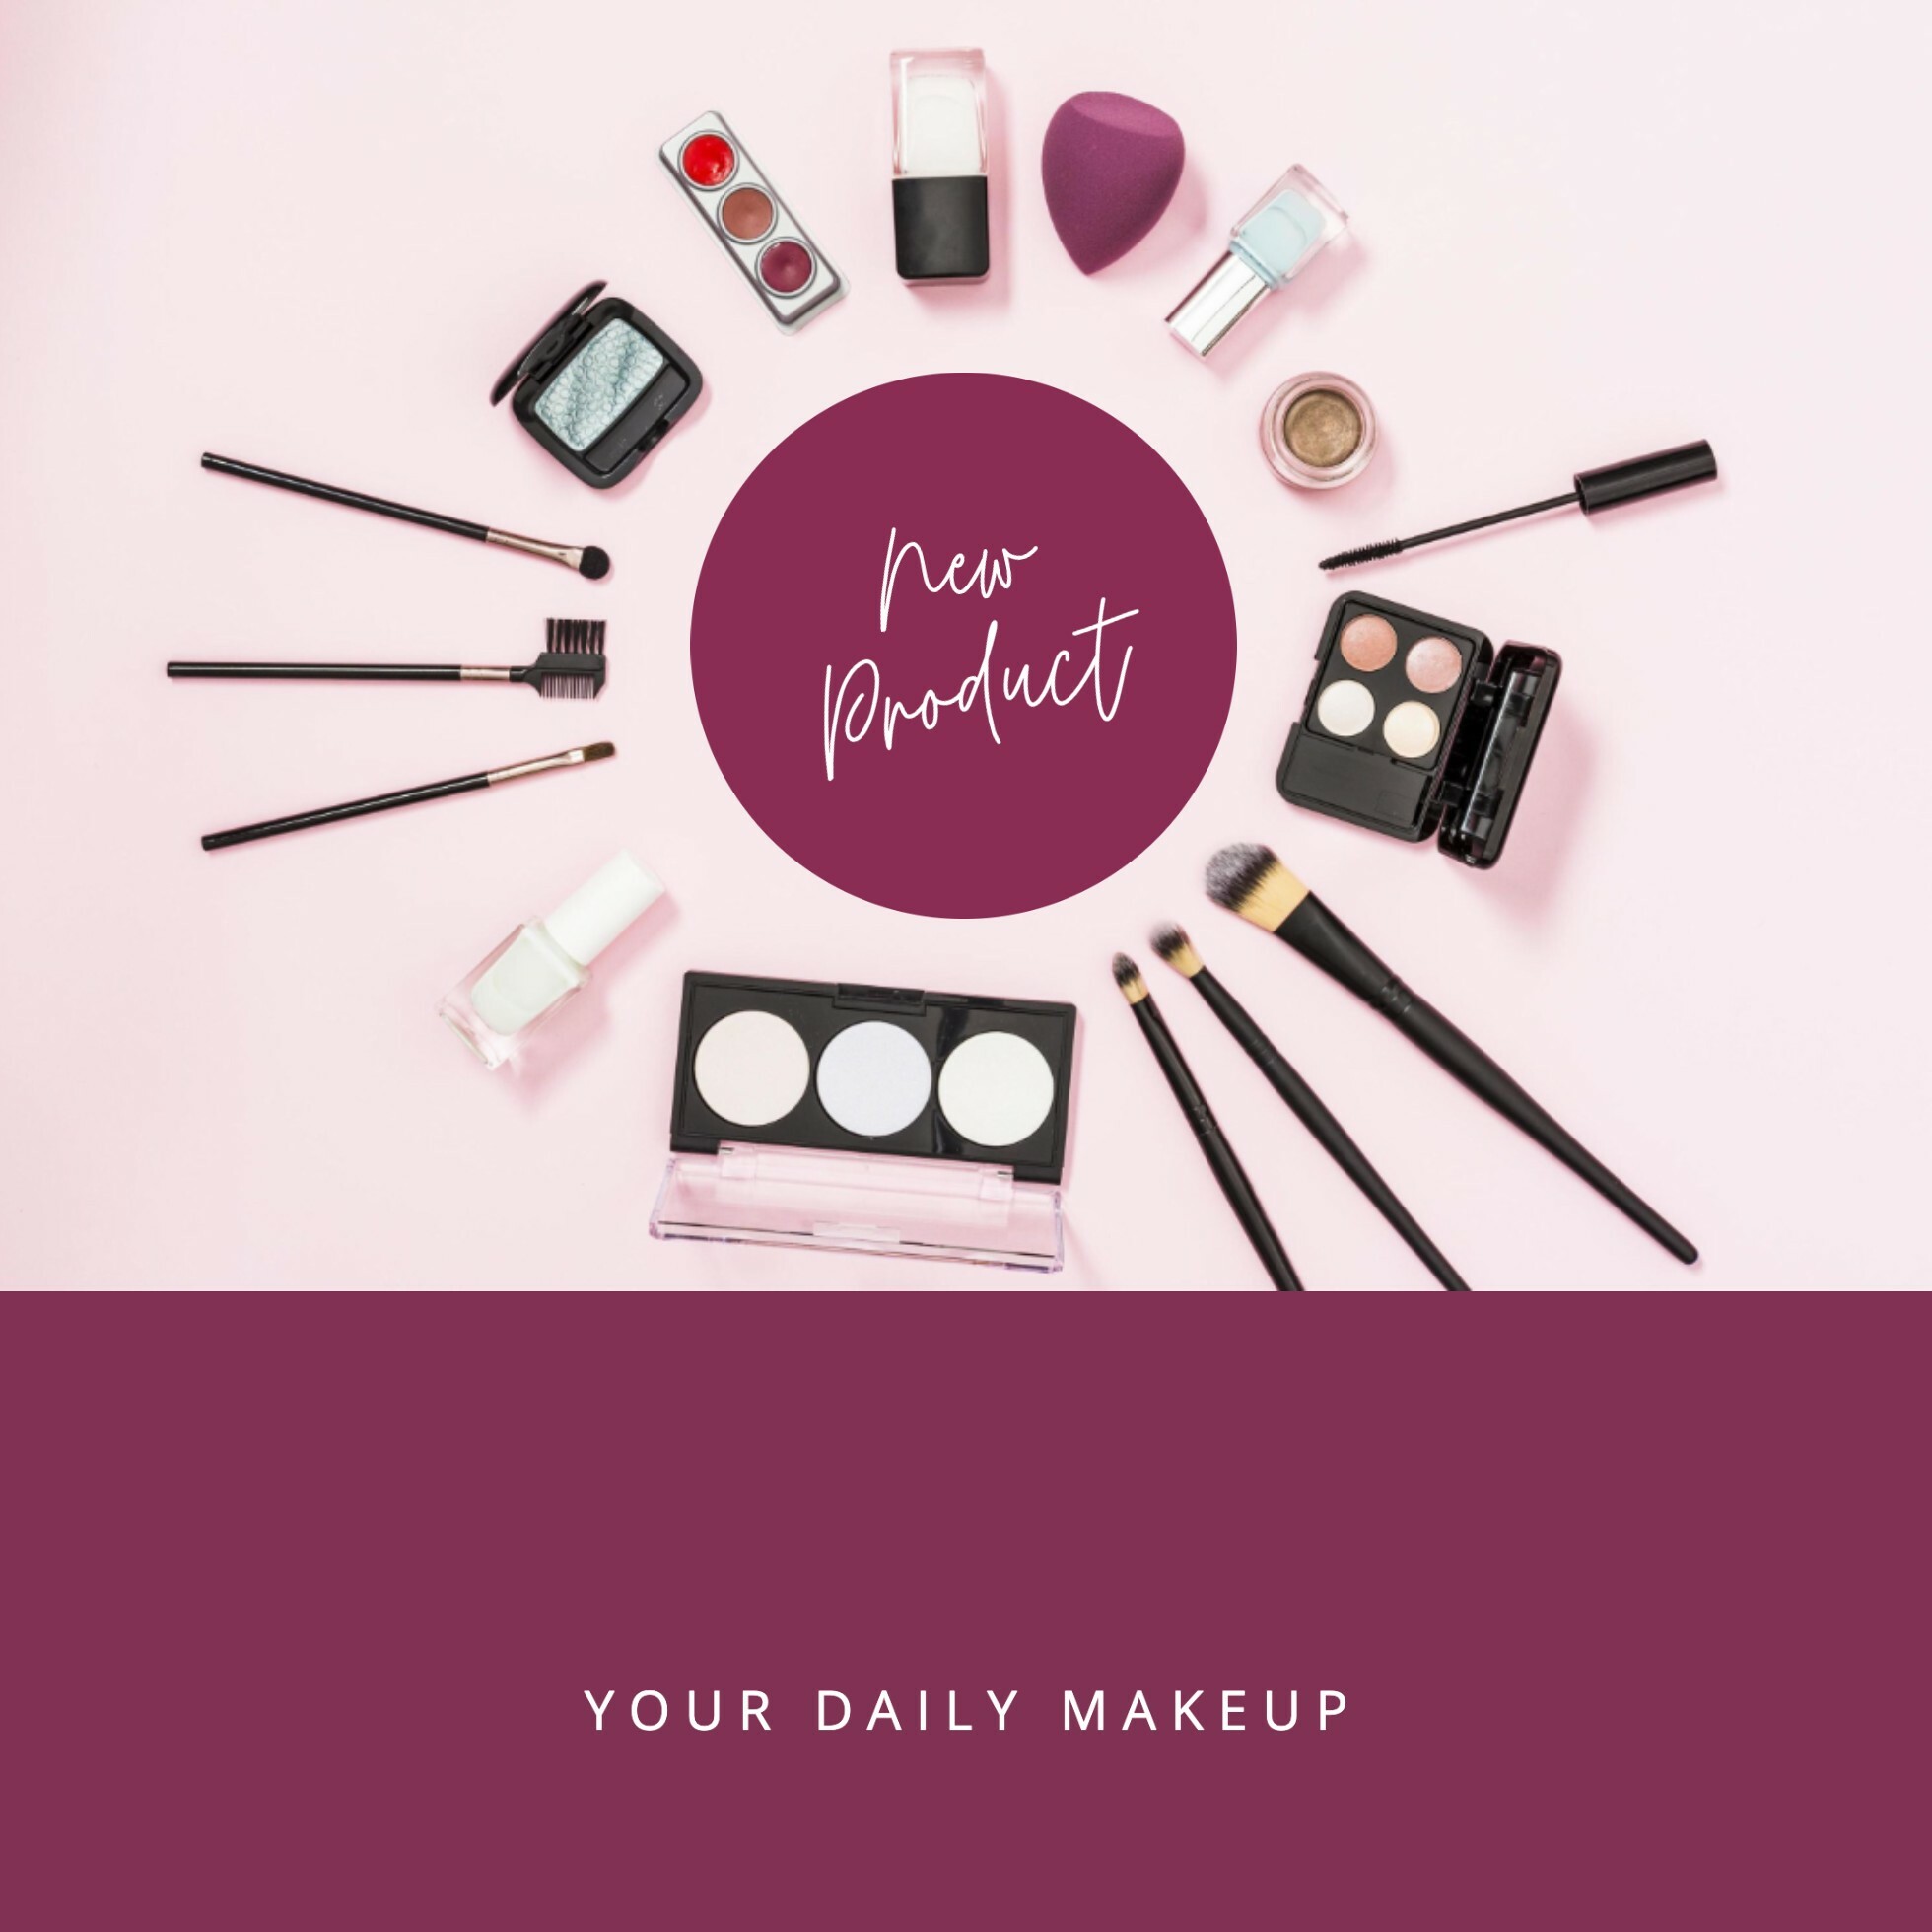 Pink Feminine Daily Makeup Product Instagram Post template